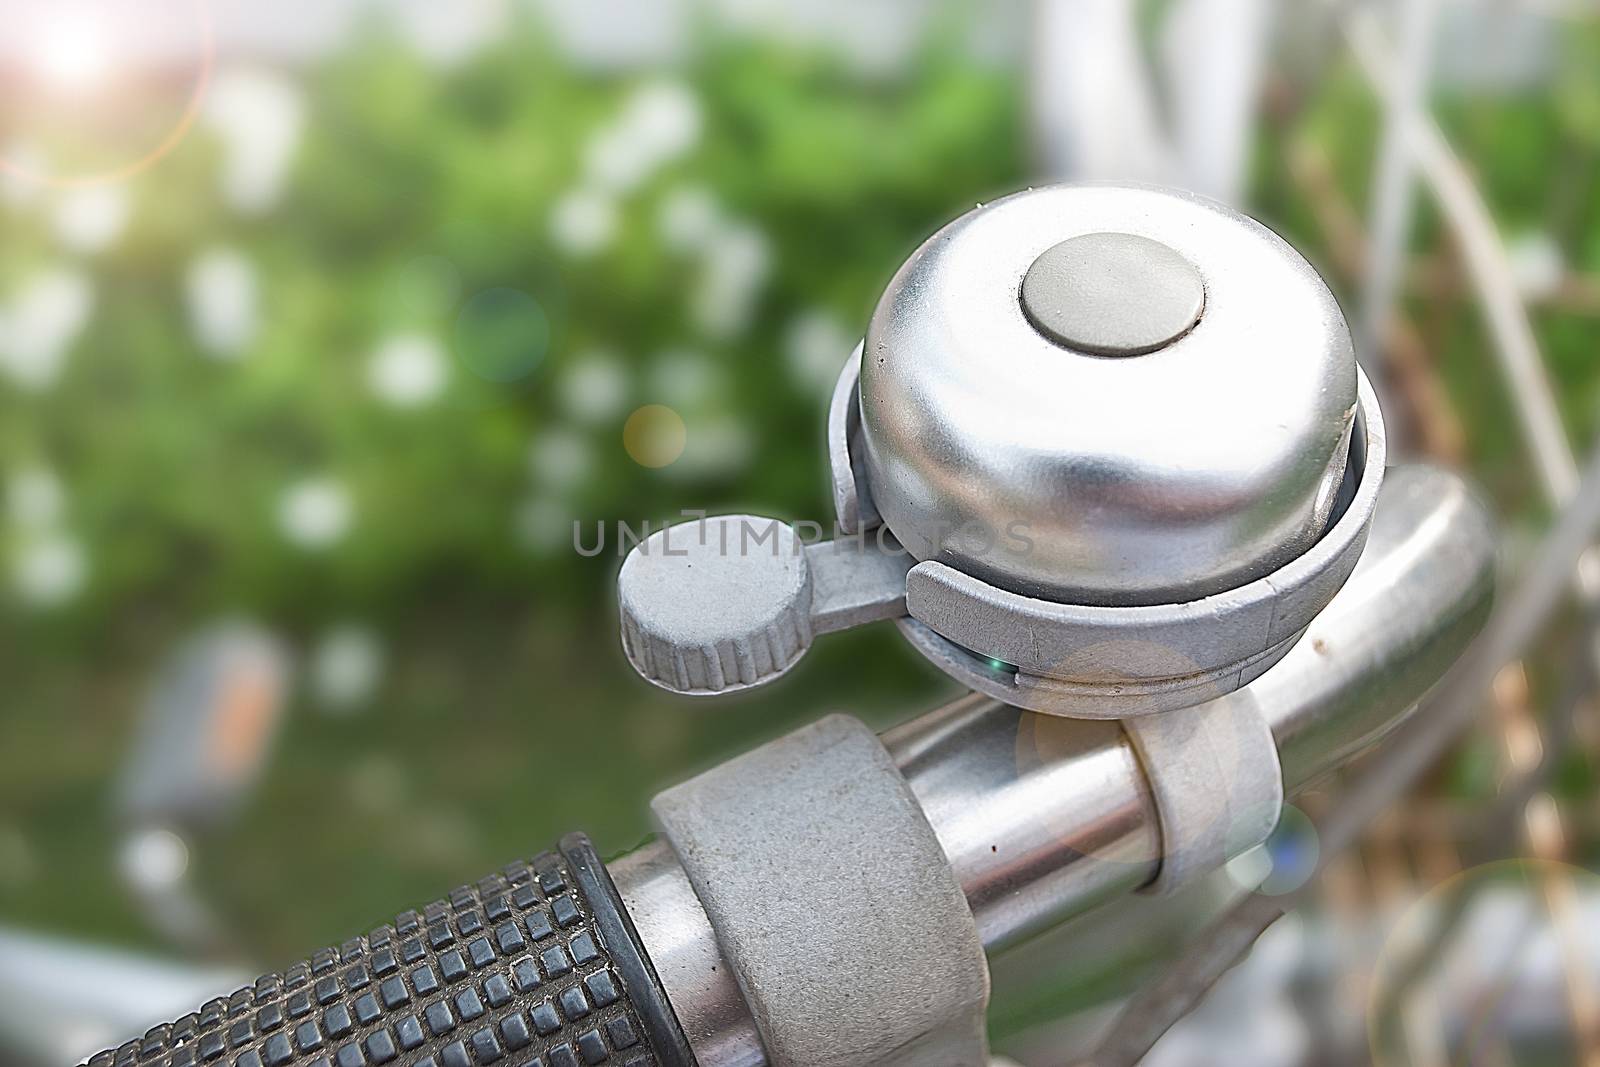 old bicycle bell on blur background (adding lighting len flare from upper right hand corner)